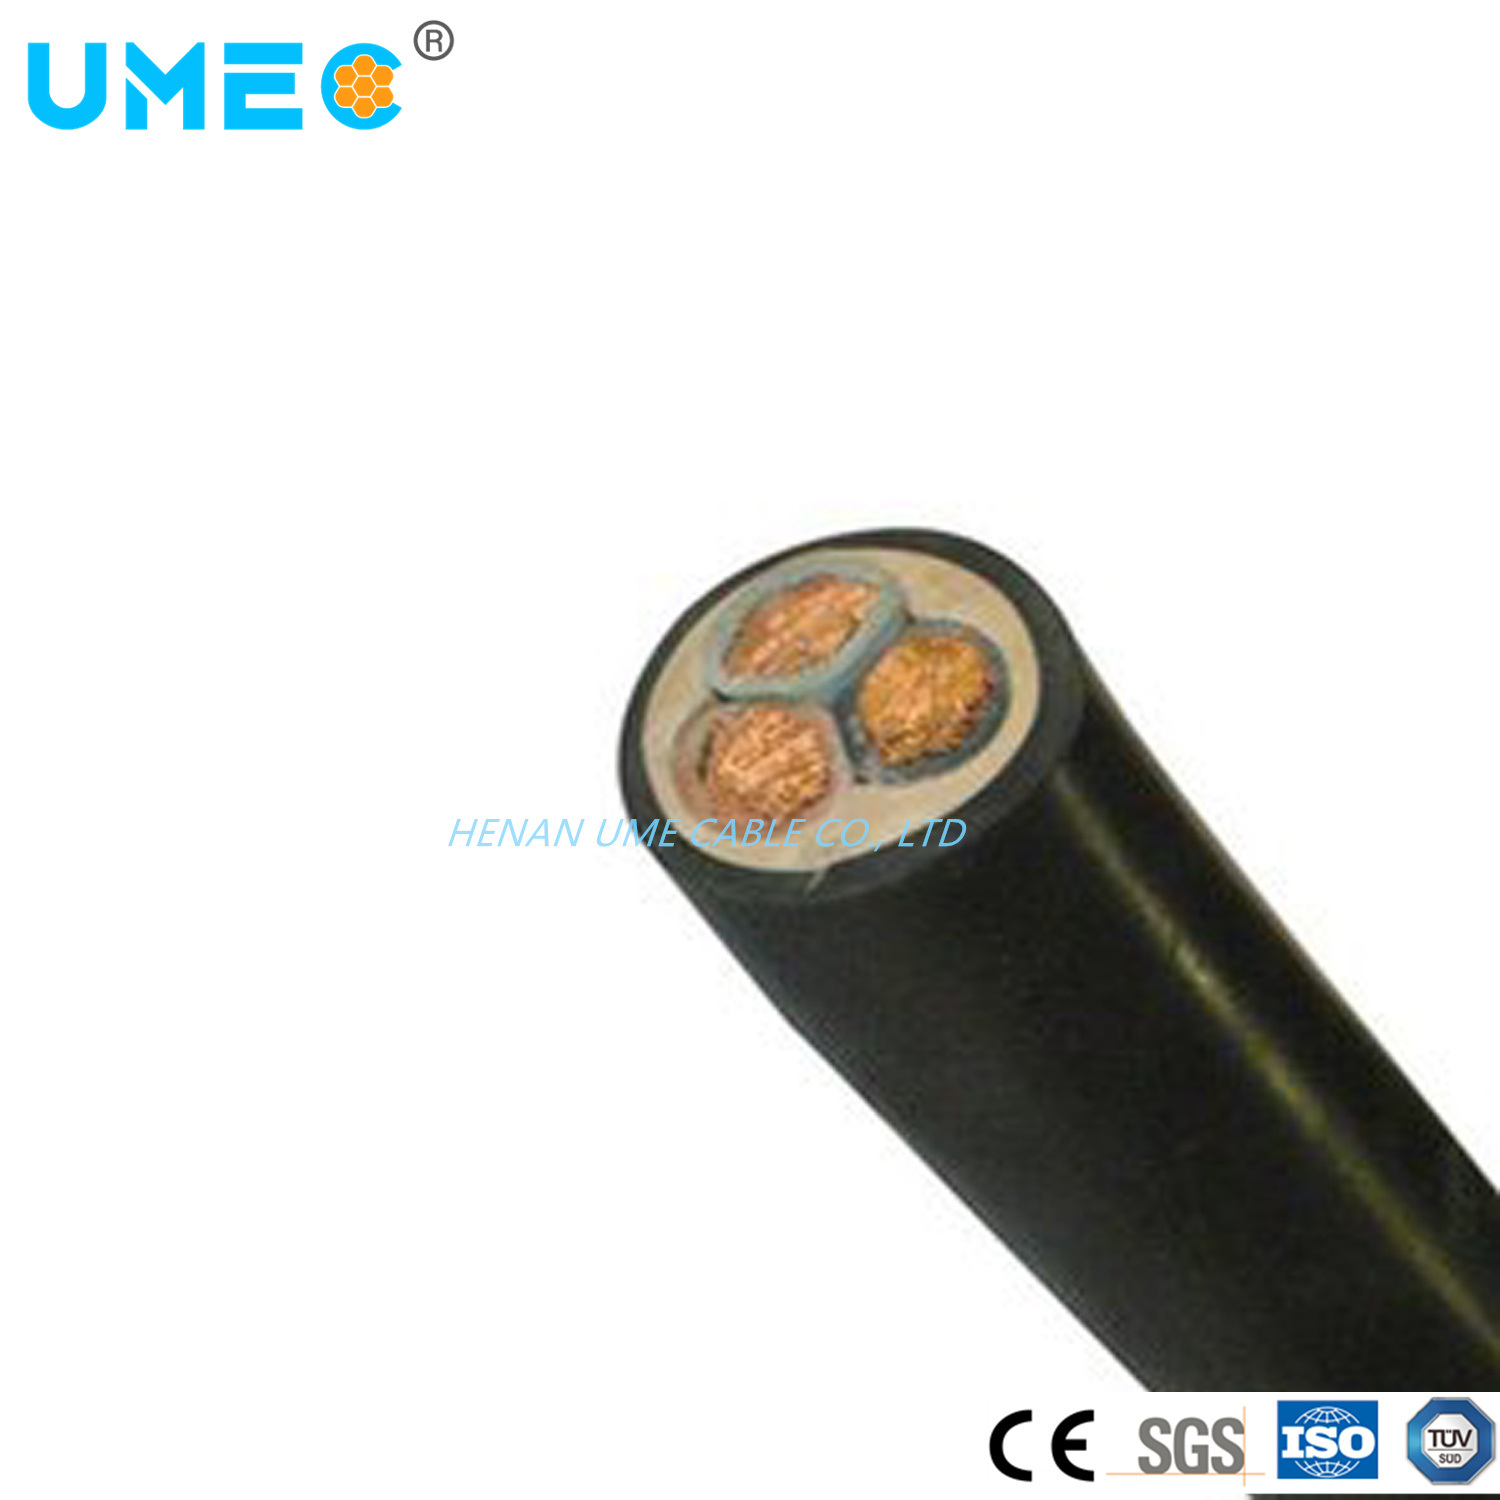 Ume 10 Gauge10 AWG Silicone Rubber Cable 1050 Strands 0.08mm Tinned Copper Conductor 600V 200V Instrument Cable Wire